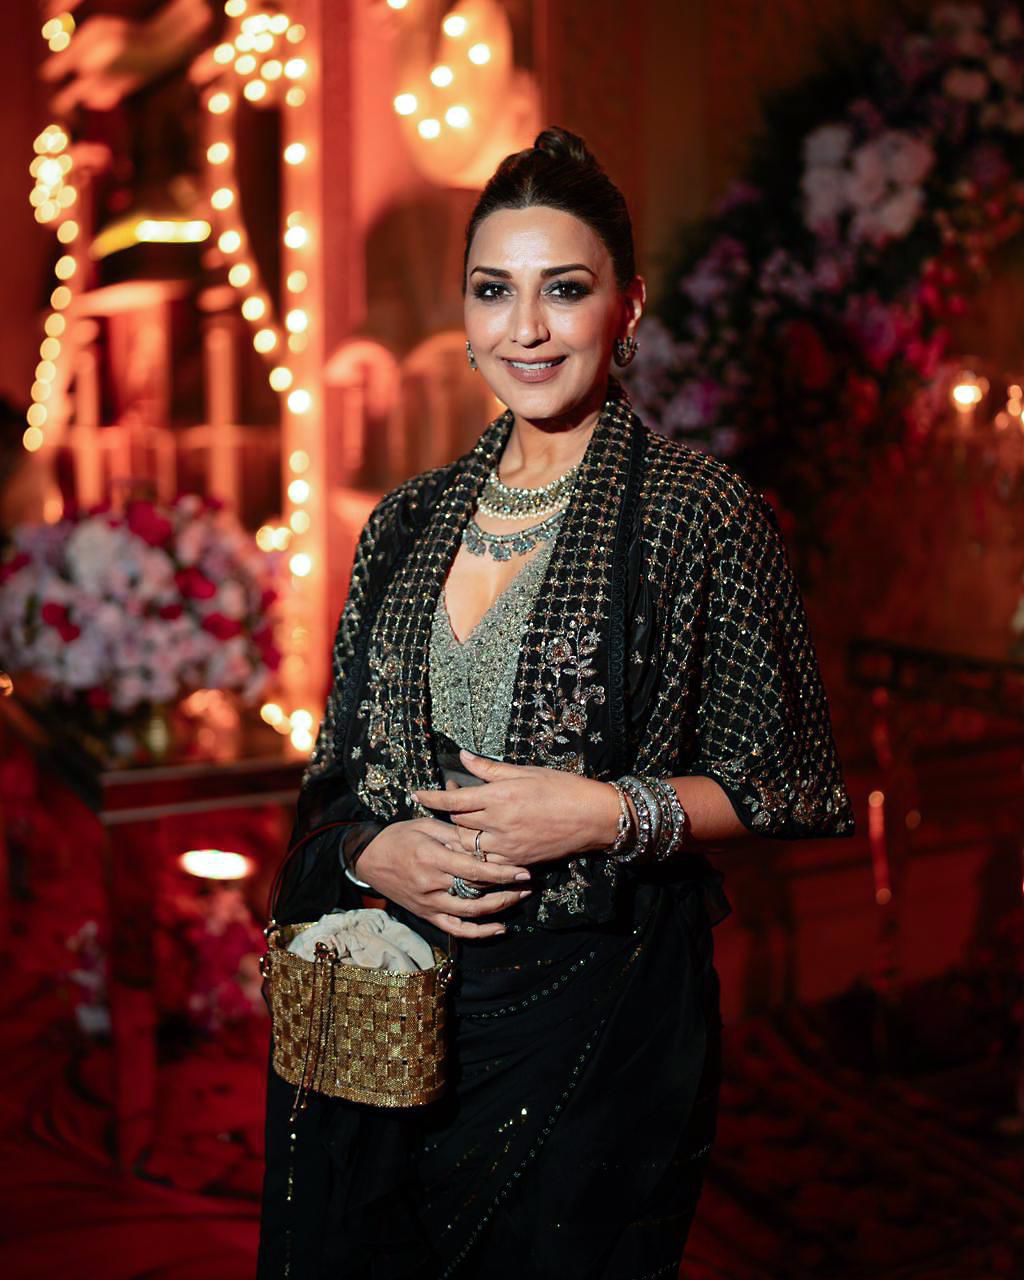 Sonali Bendre says she almost ‘packed bags and left’ films before ‘Humma Humma’ became a hit